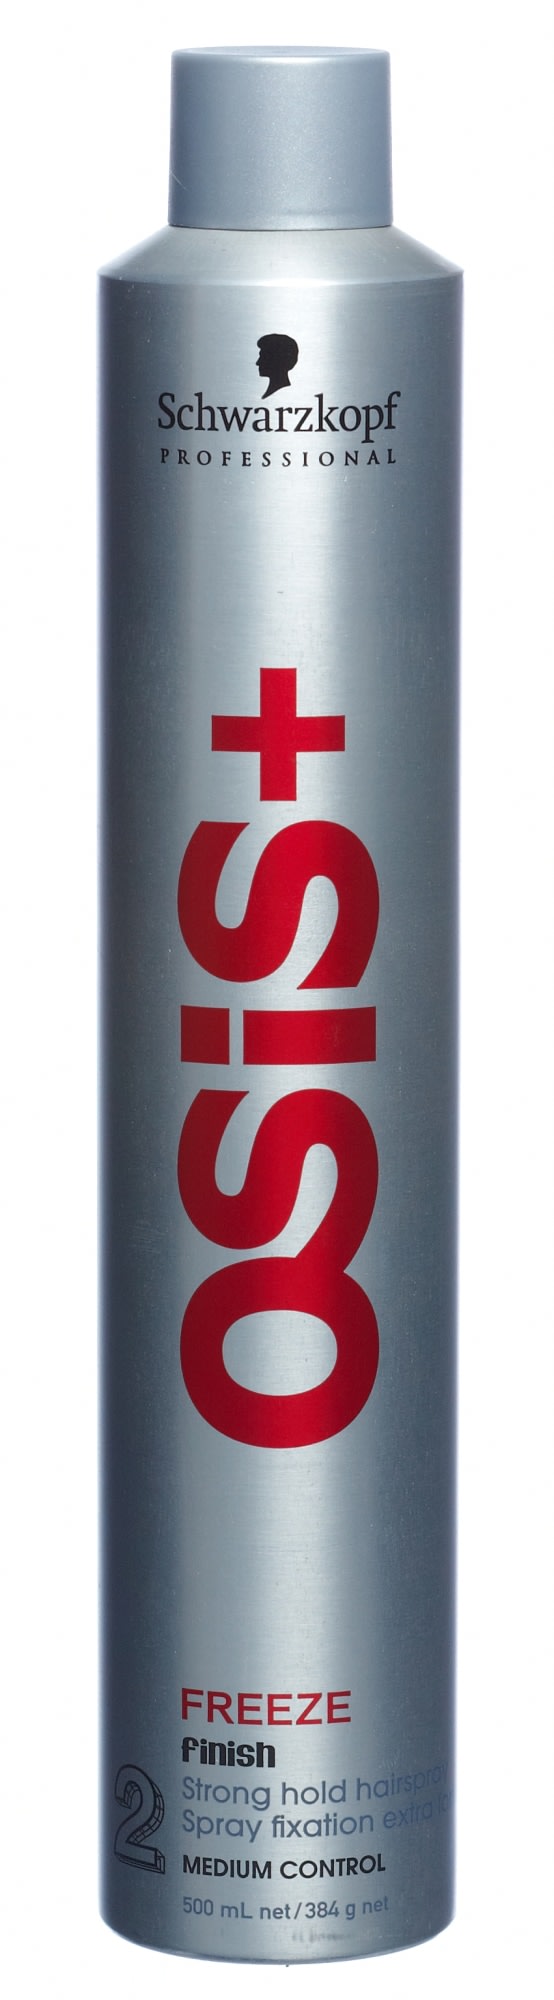 Essential Brands: OSiS+ Session Label Super Dry Memory Net